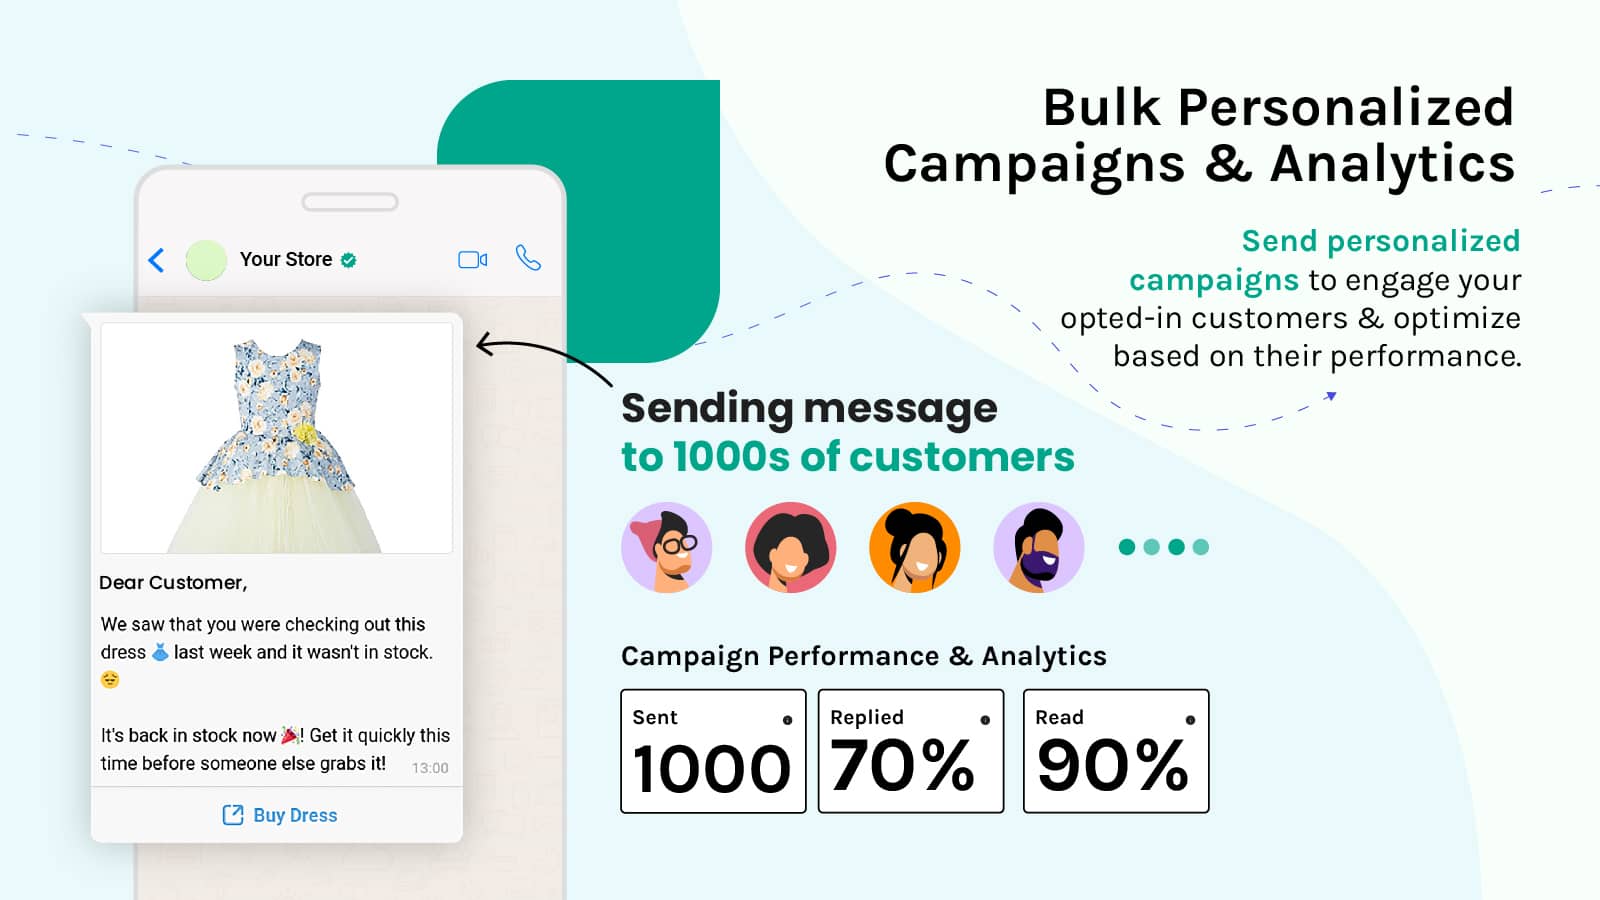 Bulk personalized campaigns and analytics